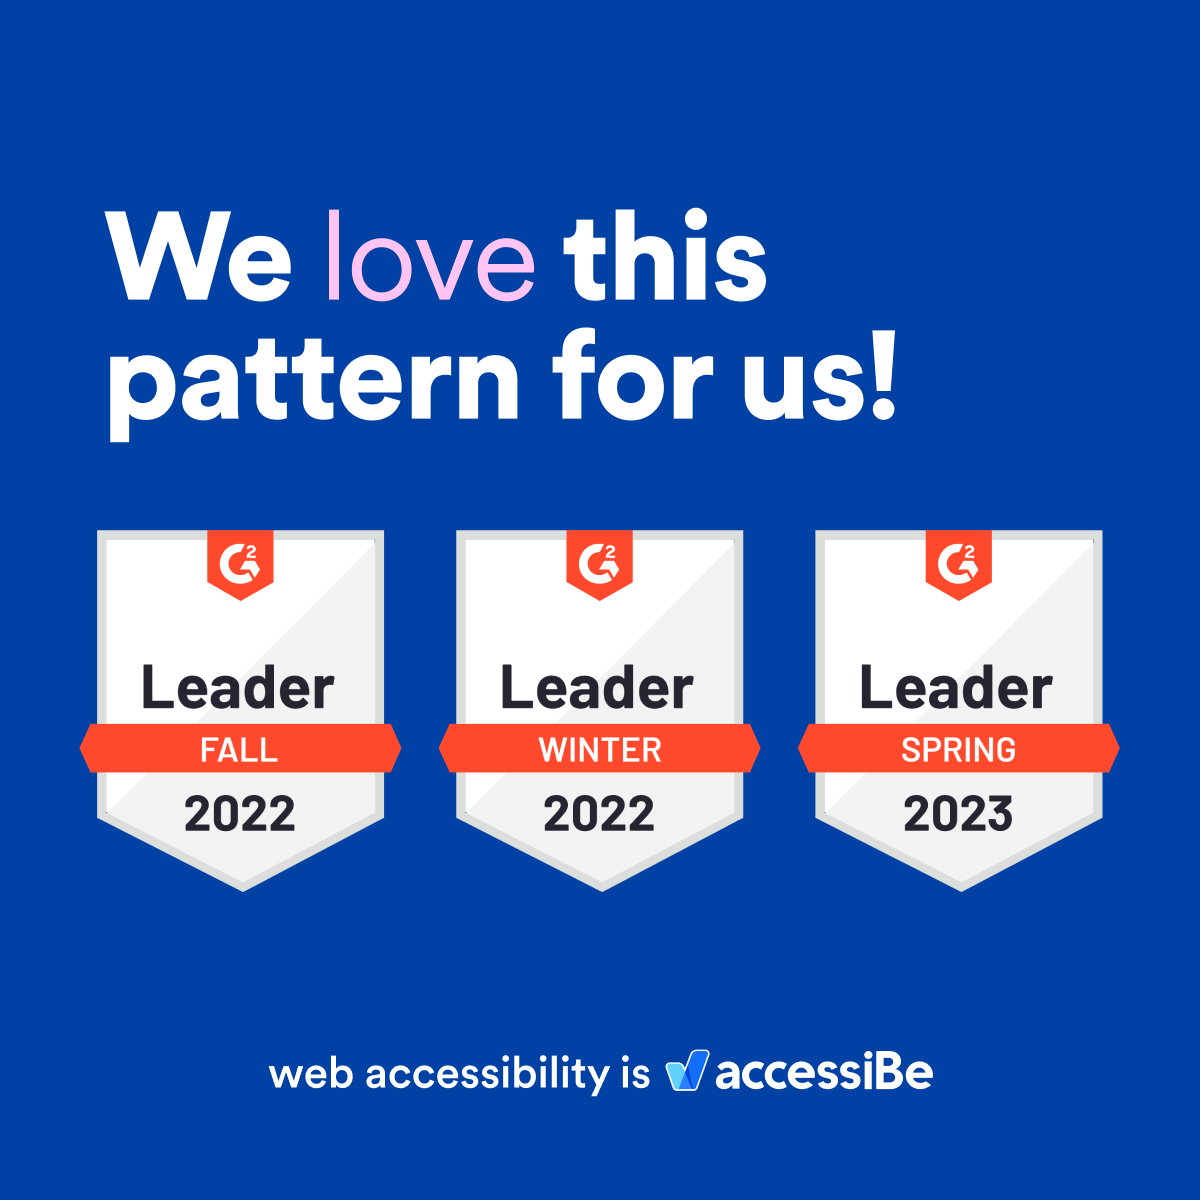 Blue background with title “We love this pattern for us!”, title written in white with the word “love” highlighted in pink. Below it, three G2 badges “Leader Fall 2022, Leader Winter 2022, Leader Spring 2023”. Below it “web accessibility is”, logo accessiBe.